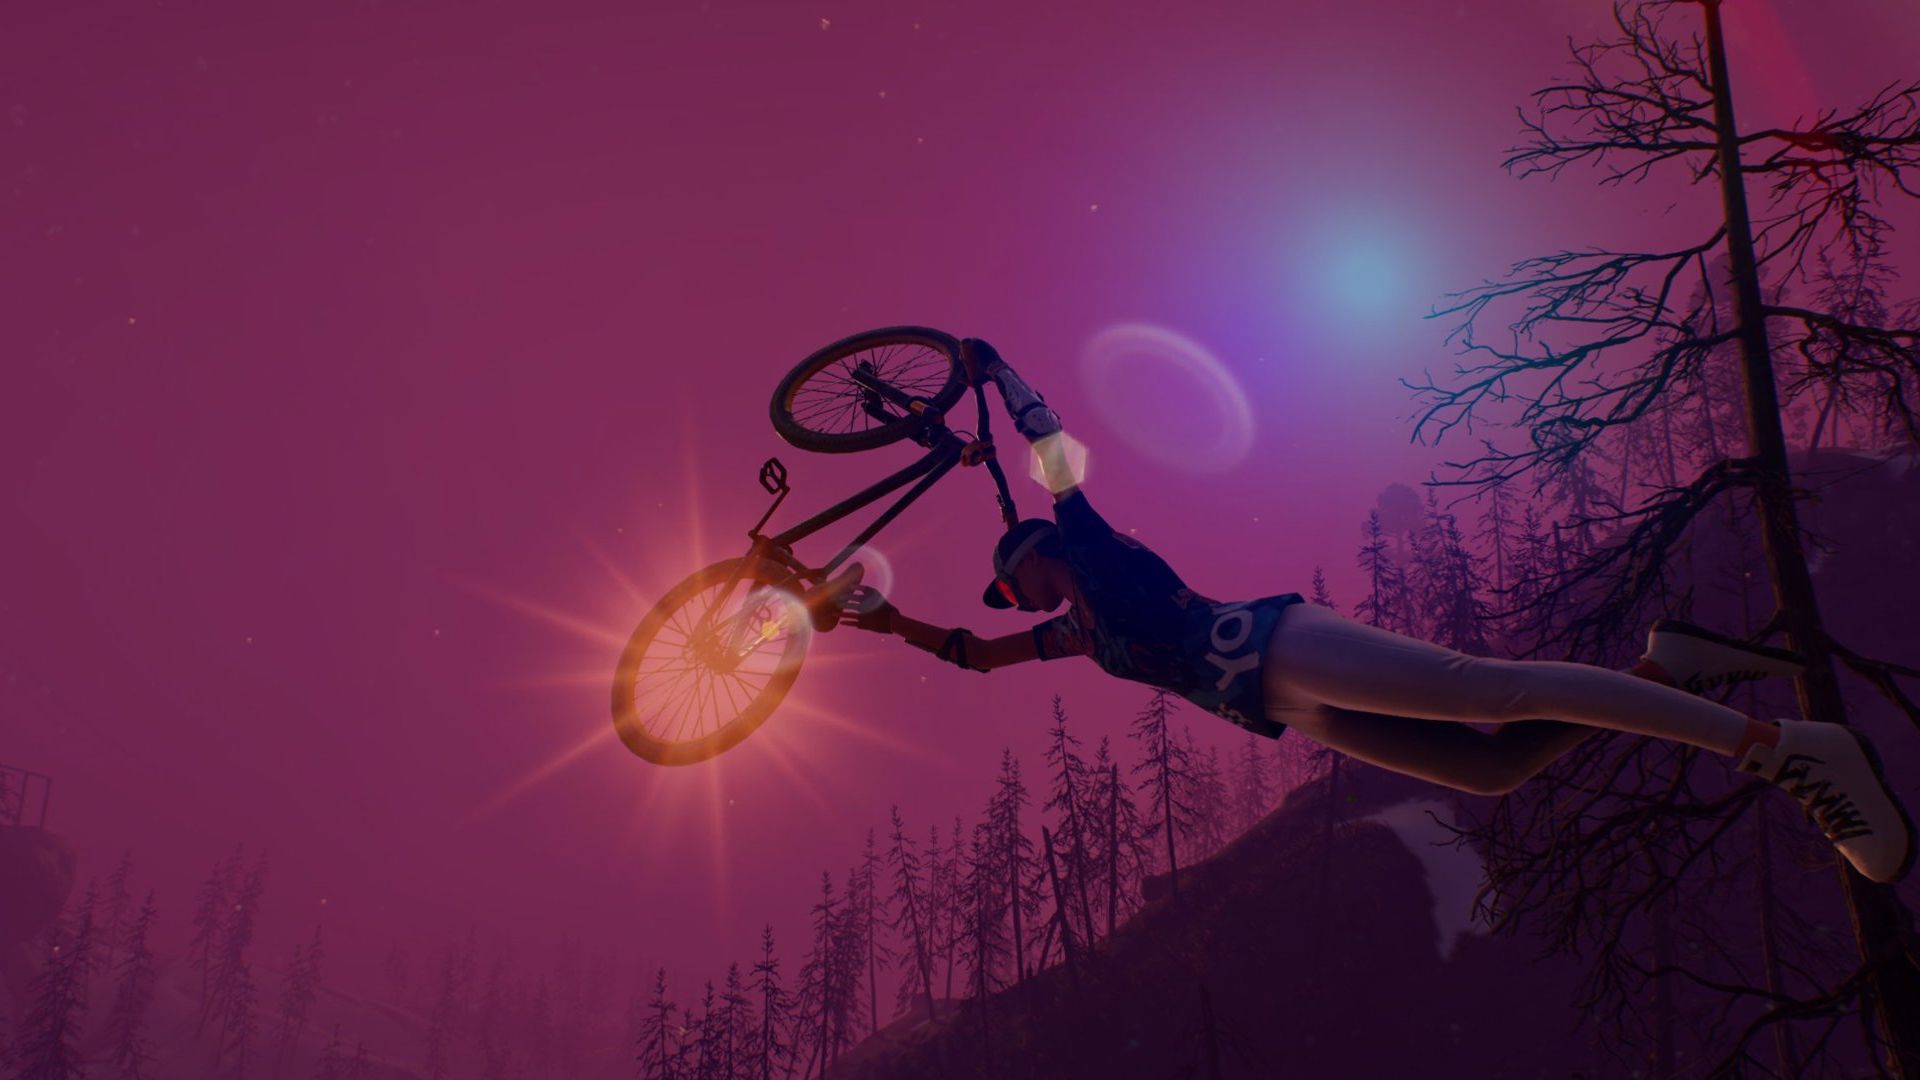 Video game screenshot of a dirt-bike and its rider in mid-air in front of a purple sky